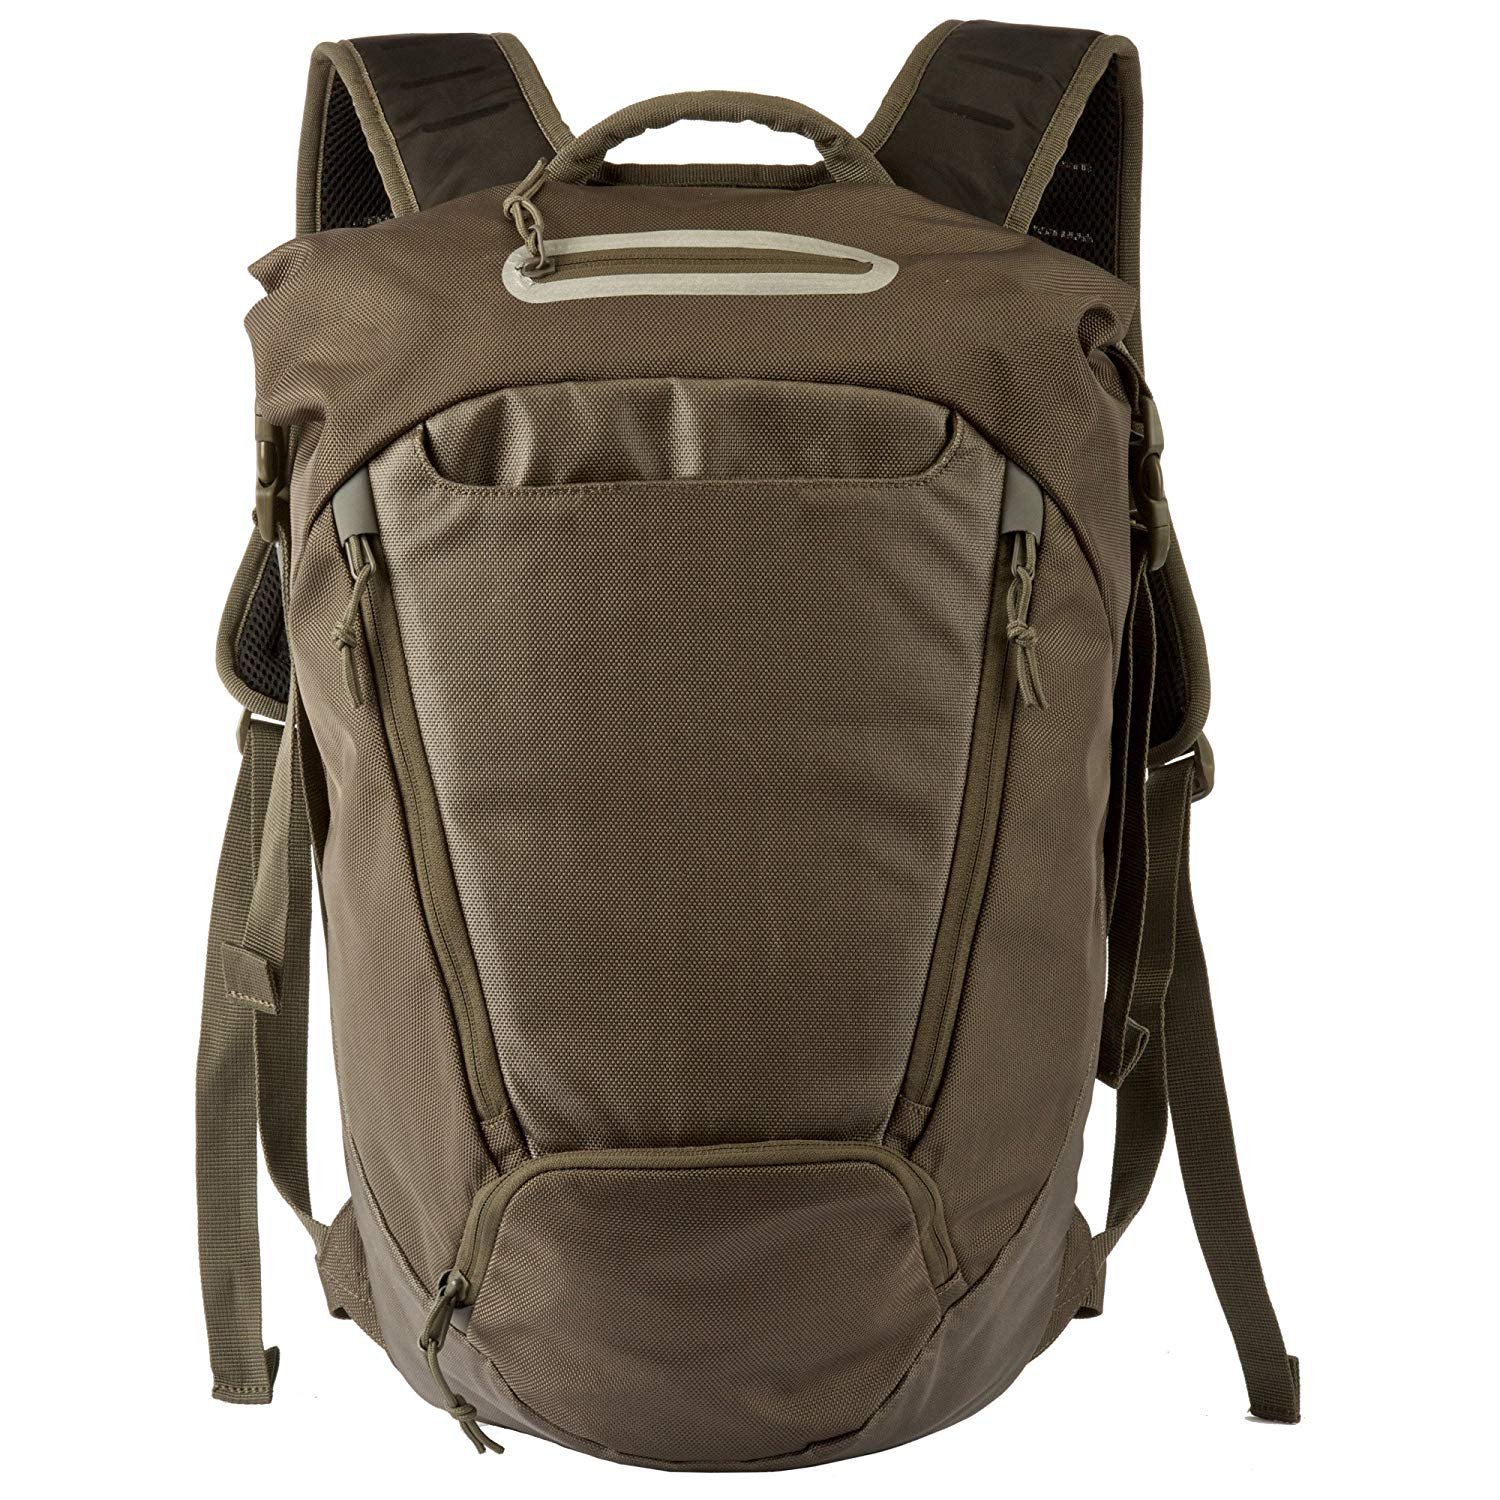 5.11 Tactical Covert Boxpack, 1680D Ballistic Polyester, Water Resistant  Finish, 32L, Tundra, Style 56284 